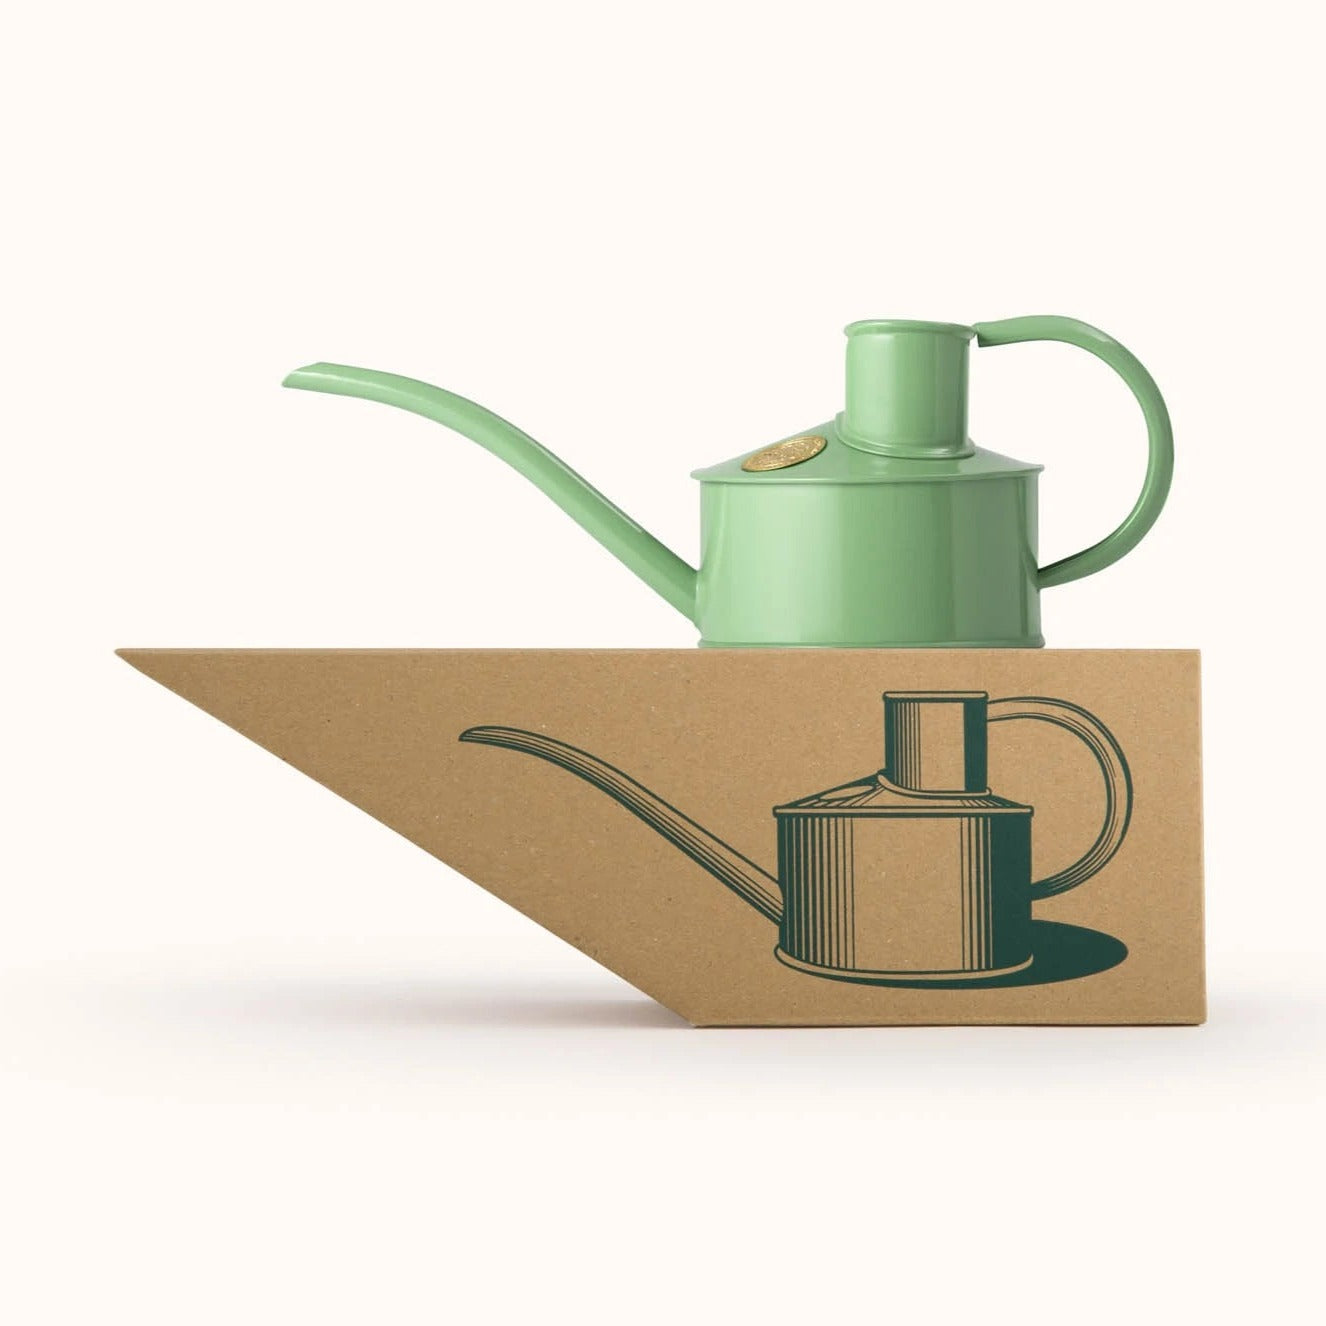 Haws 'Fazely Flow' Indoor Watering Can in Sage, Gift Boxed